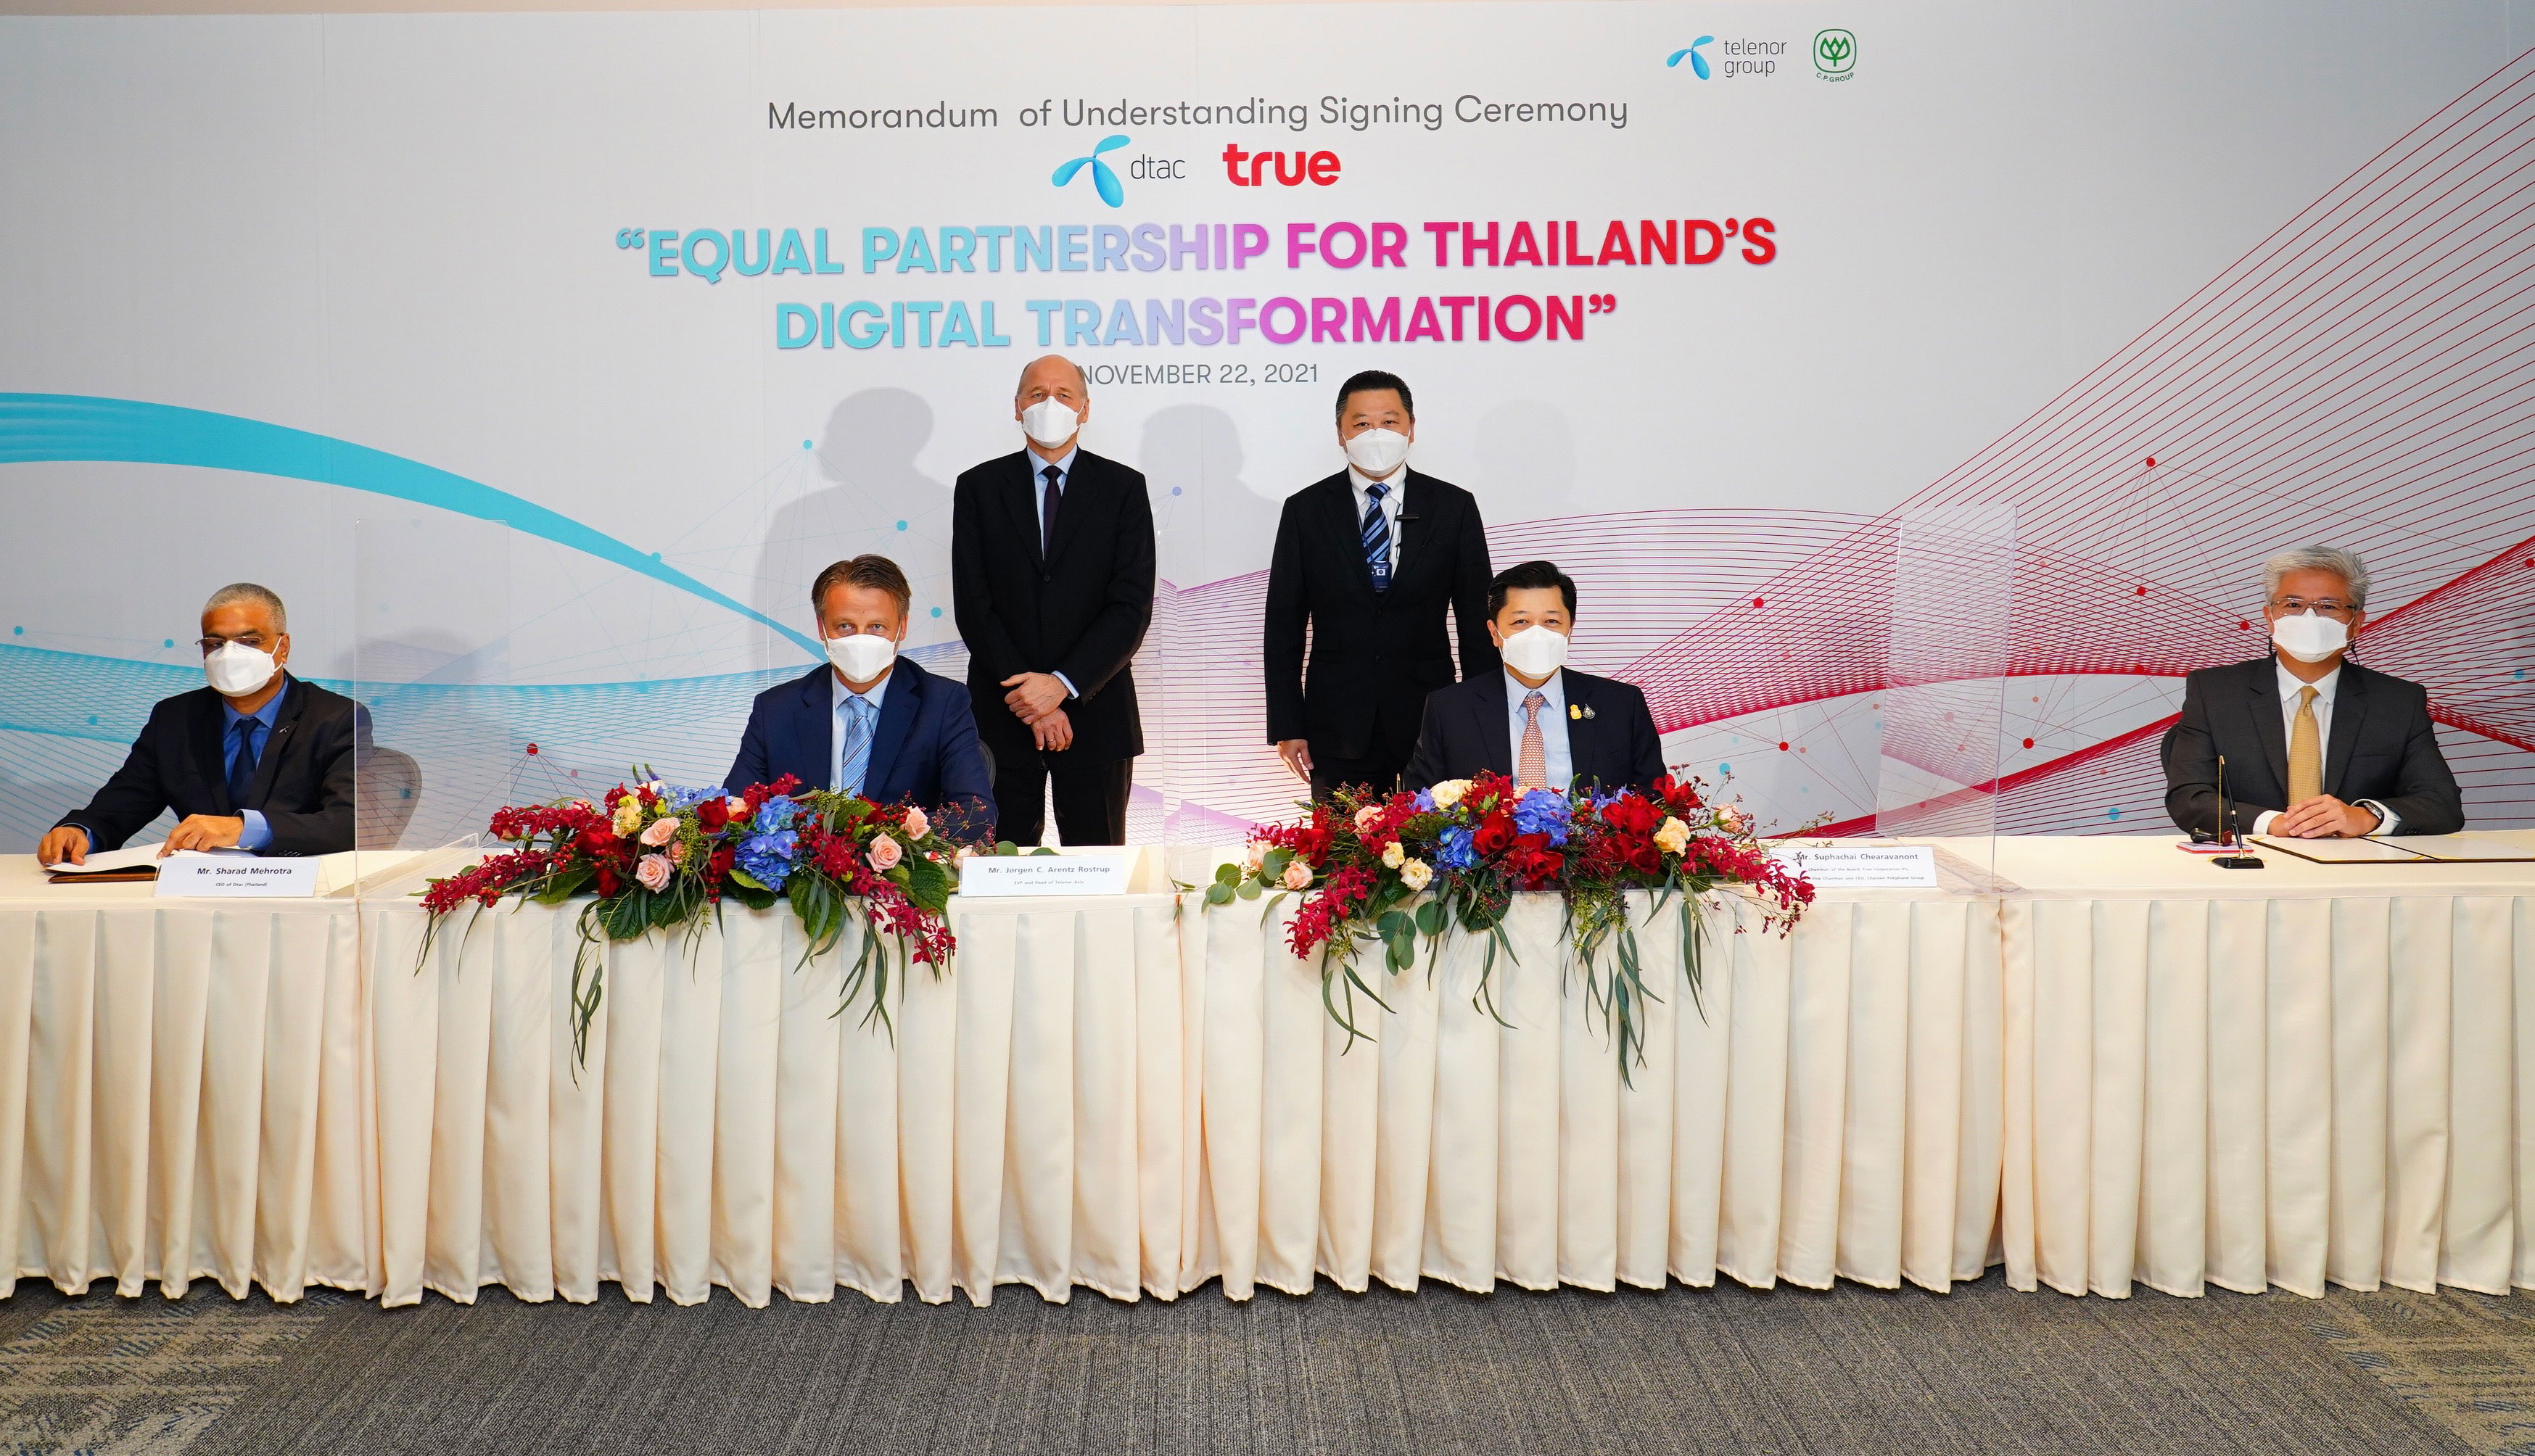 C.P. Group and Telenor Group agree to explore equal partnership to build a tech company to serve Thailand’s technology hub strategy